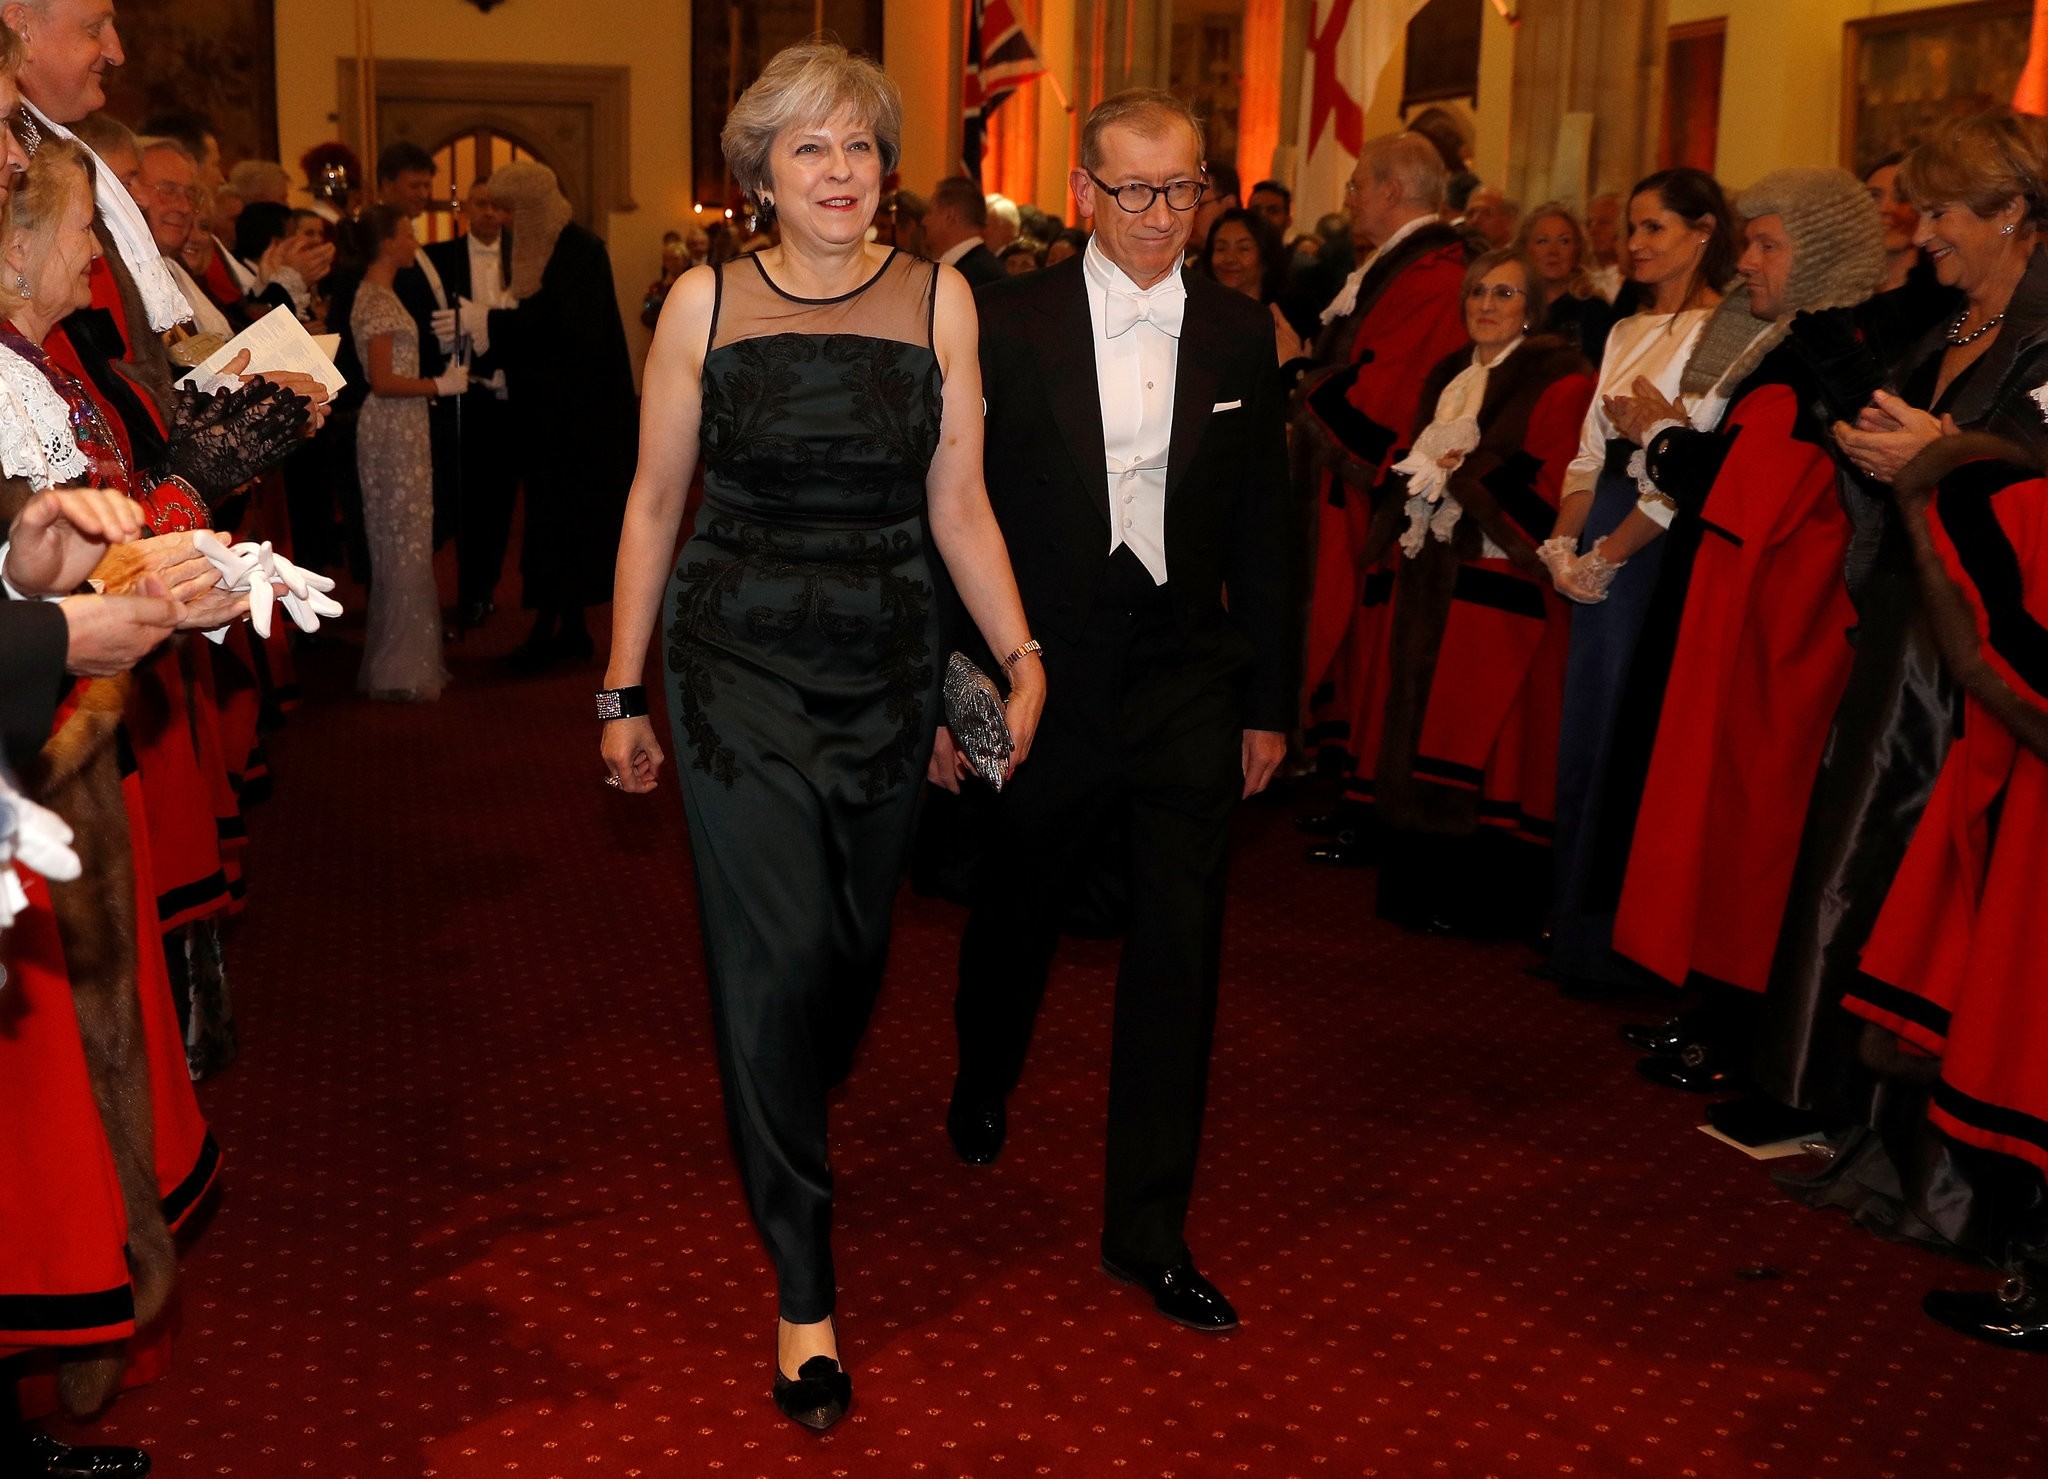 Britain's Prime Minister Theresa May arrives with her husband Philip at the Lord Mayor's Banquet at the Guildhall, in London, Britain November 13, 2017. (Reuters Photo)